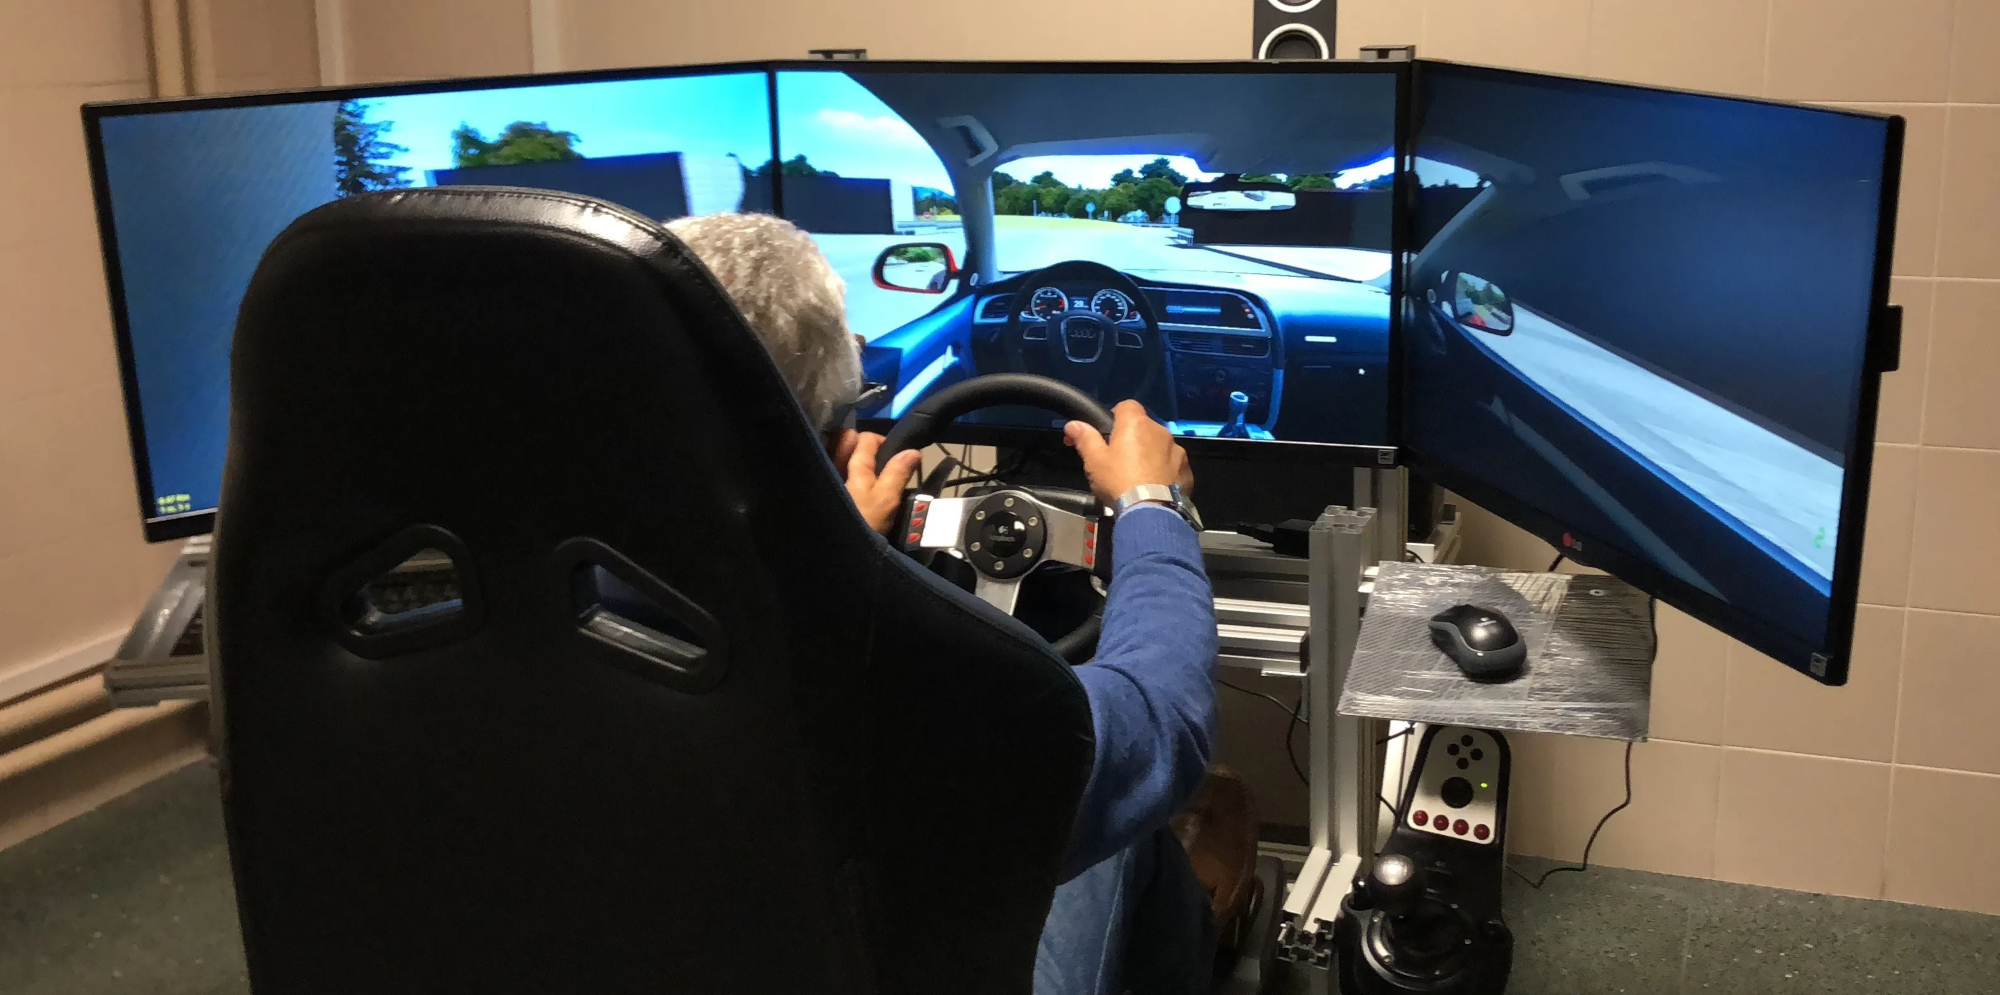 The driving simulator used by UGR researchers in the study.